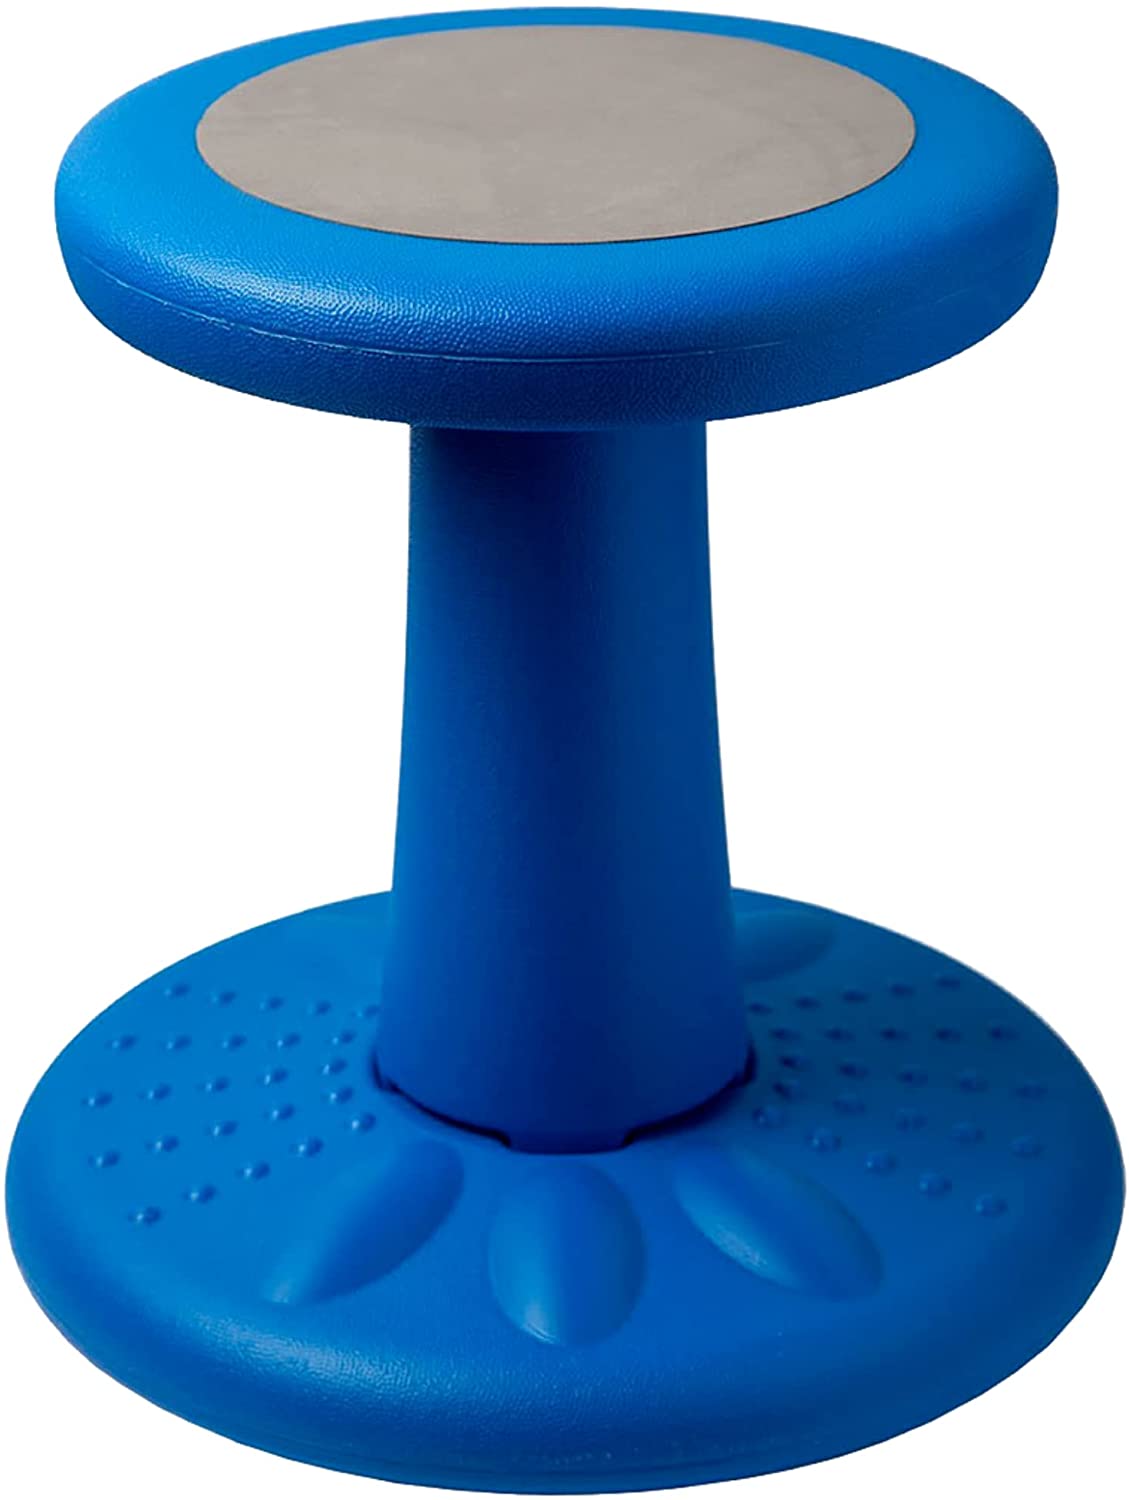 Active Kids Chair – Wobble Chair Toddlers, Pre-Schoolers